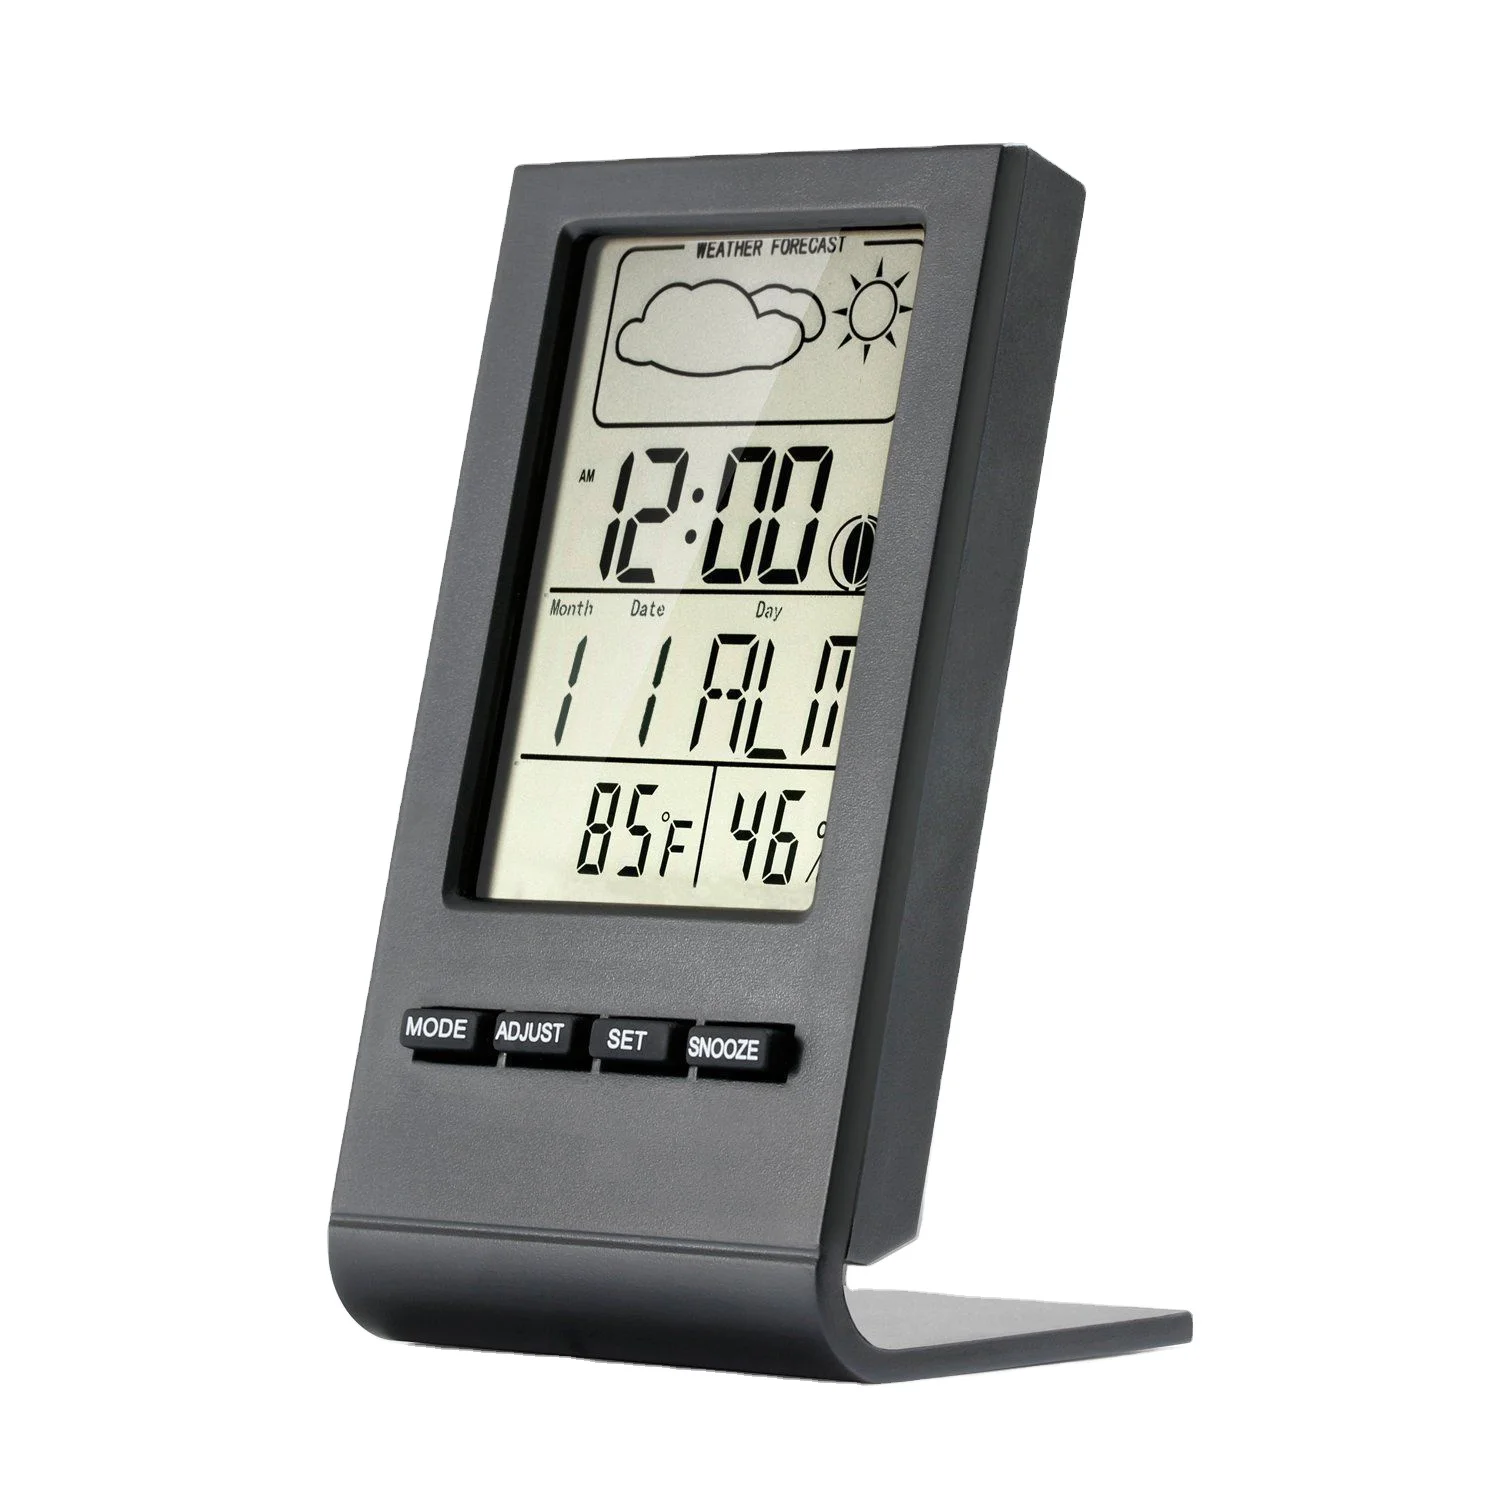 

Digital Thermo-hygrometer Weather Station Electronic Calendar, Black and white